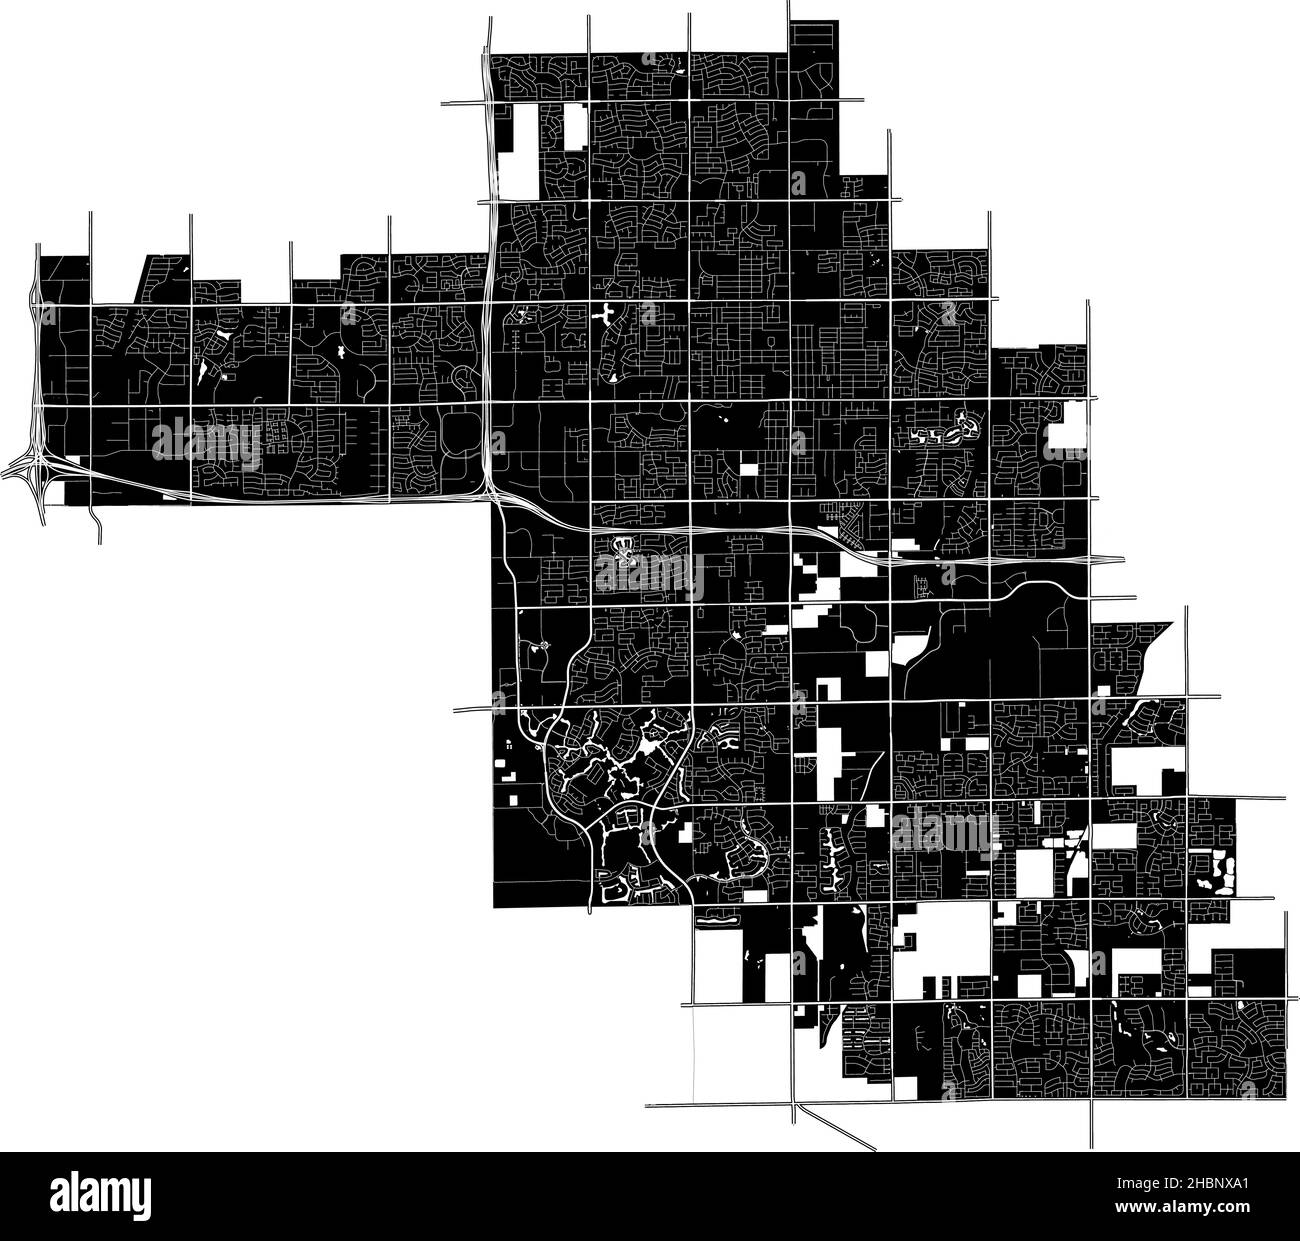 Chandler, Arizona, United States, high resolution vector map with city boundaries, and editable paths. The city map was drawn with white areas and lin Stock Vector